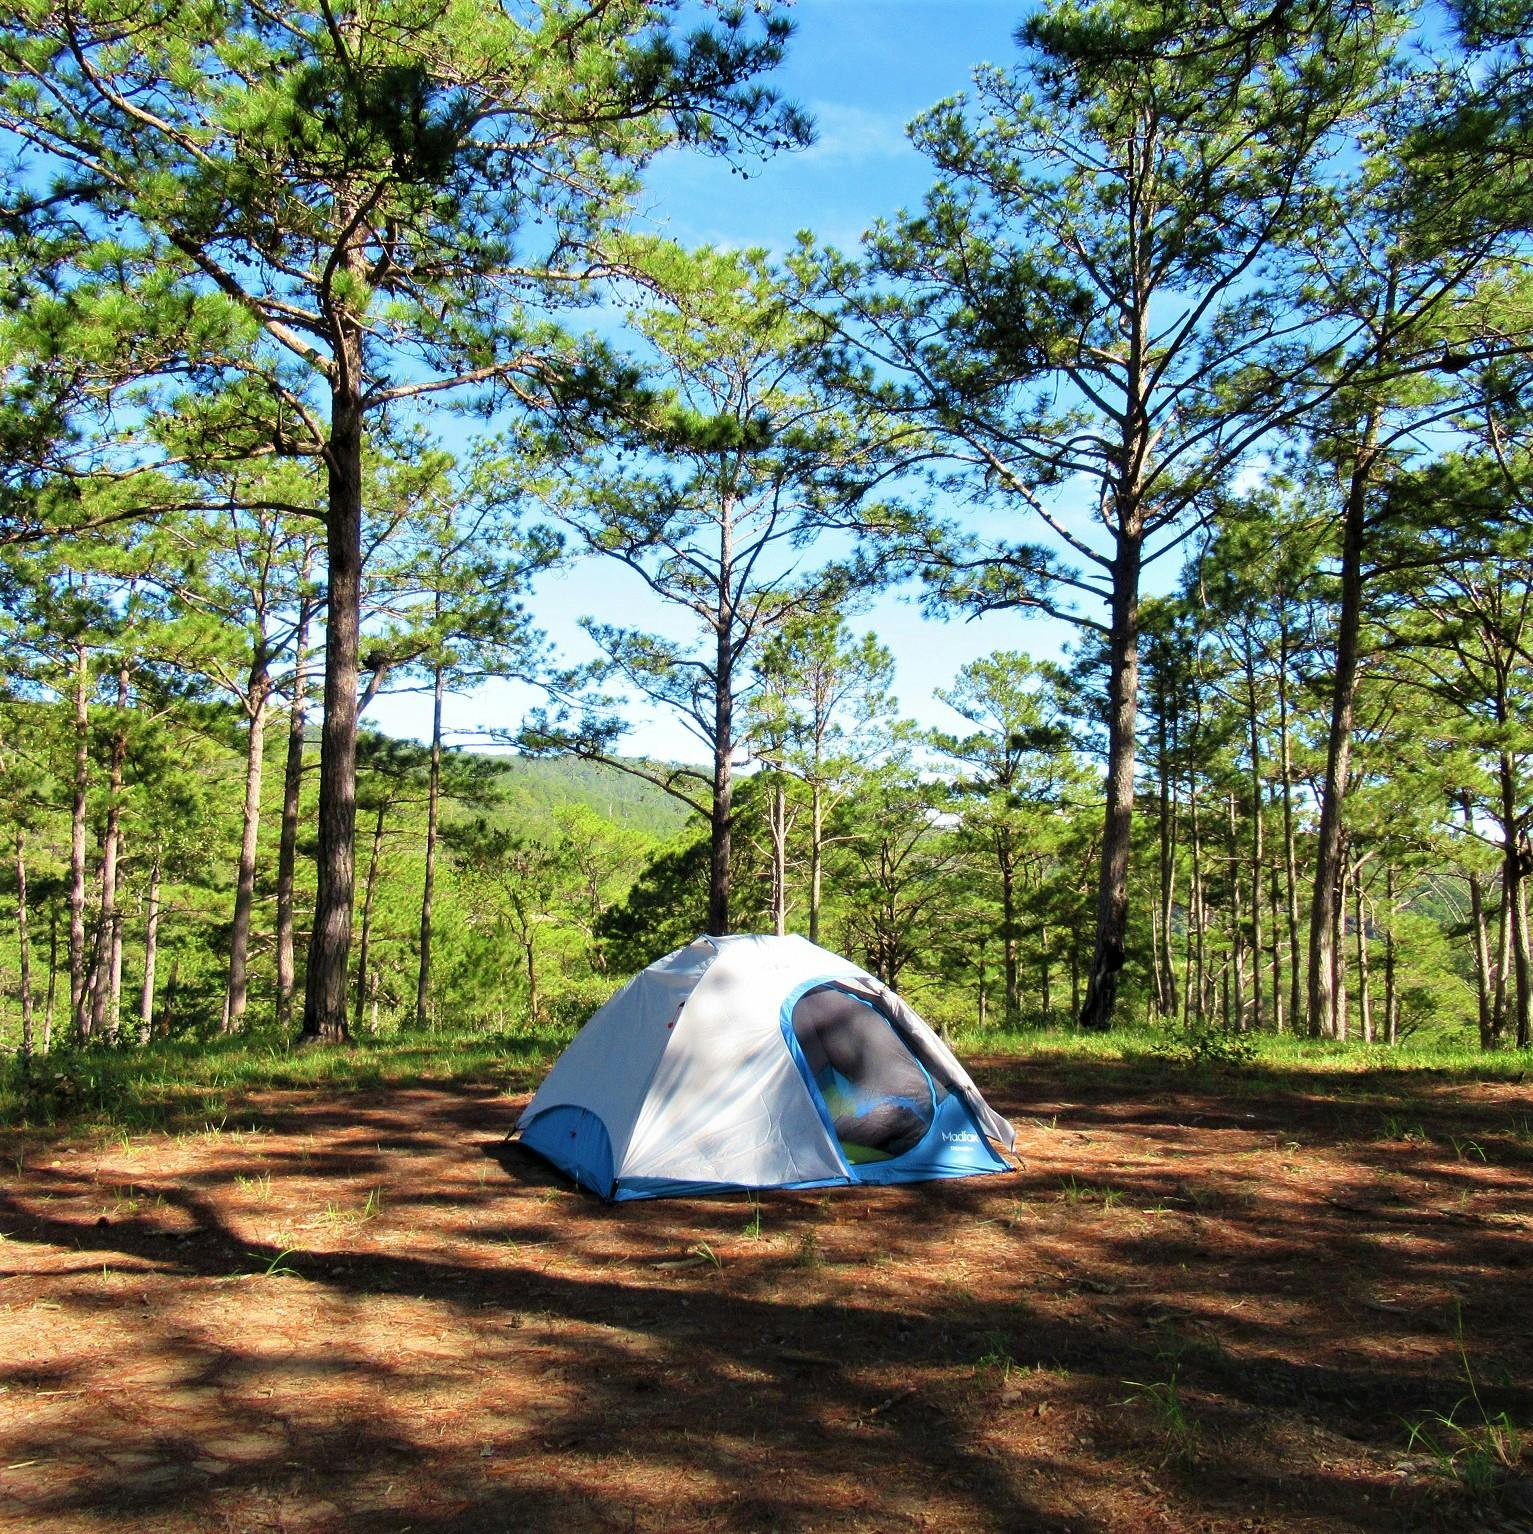 New Year's Camping in the Pine Forests, Dalat, Vietnam